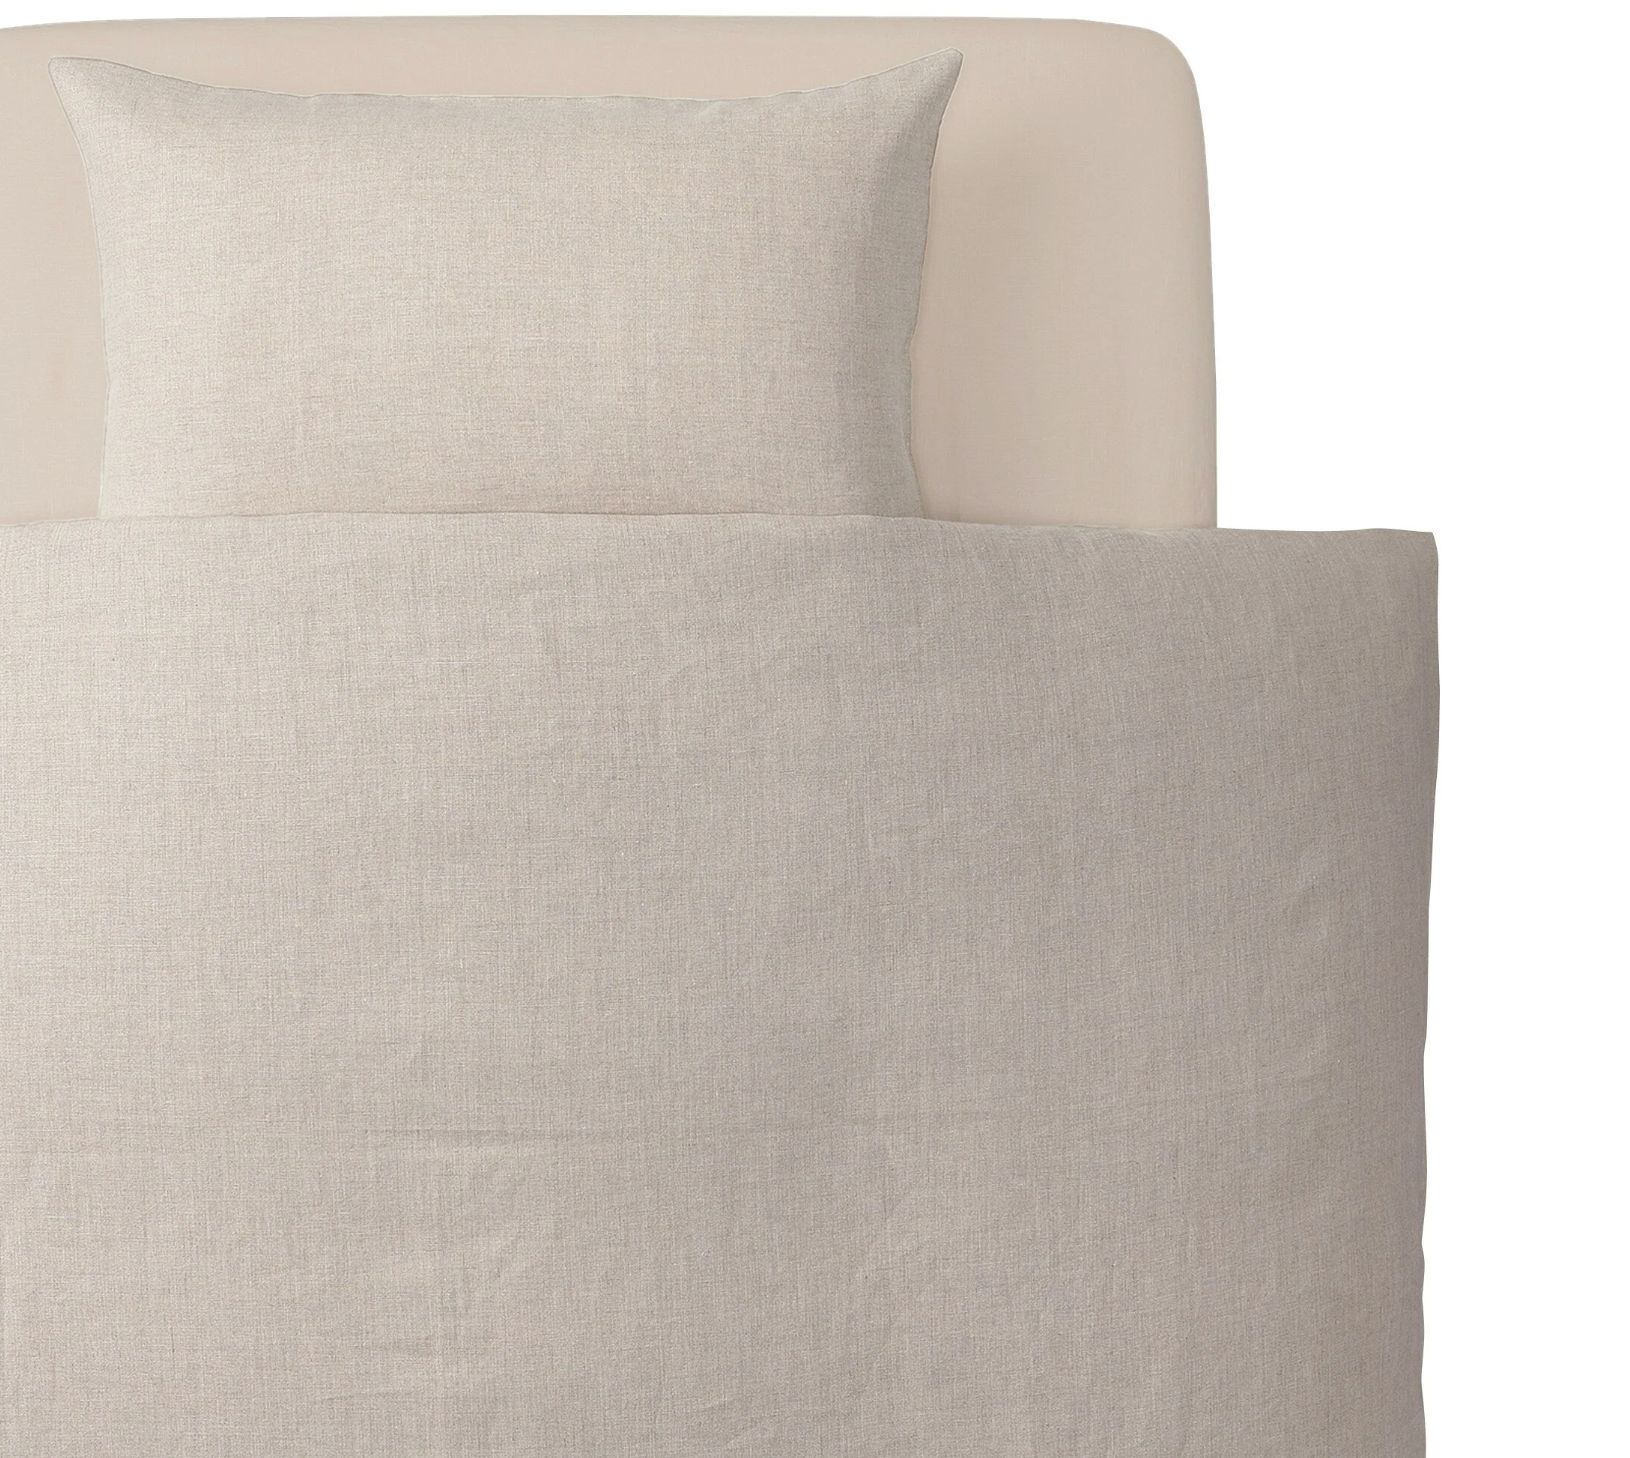 Bed with neutral linen bedding set